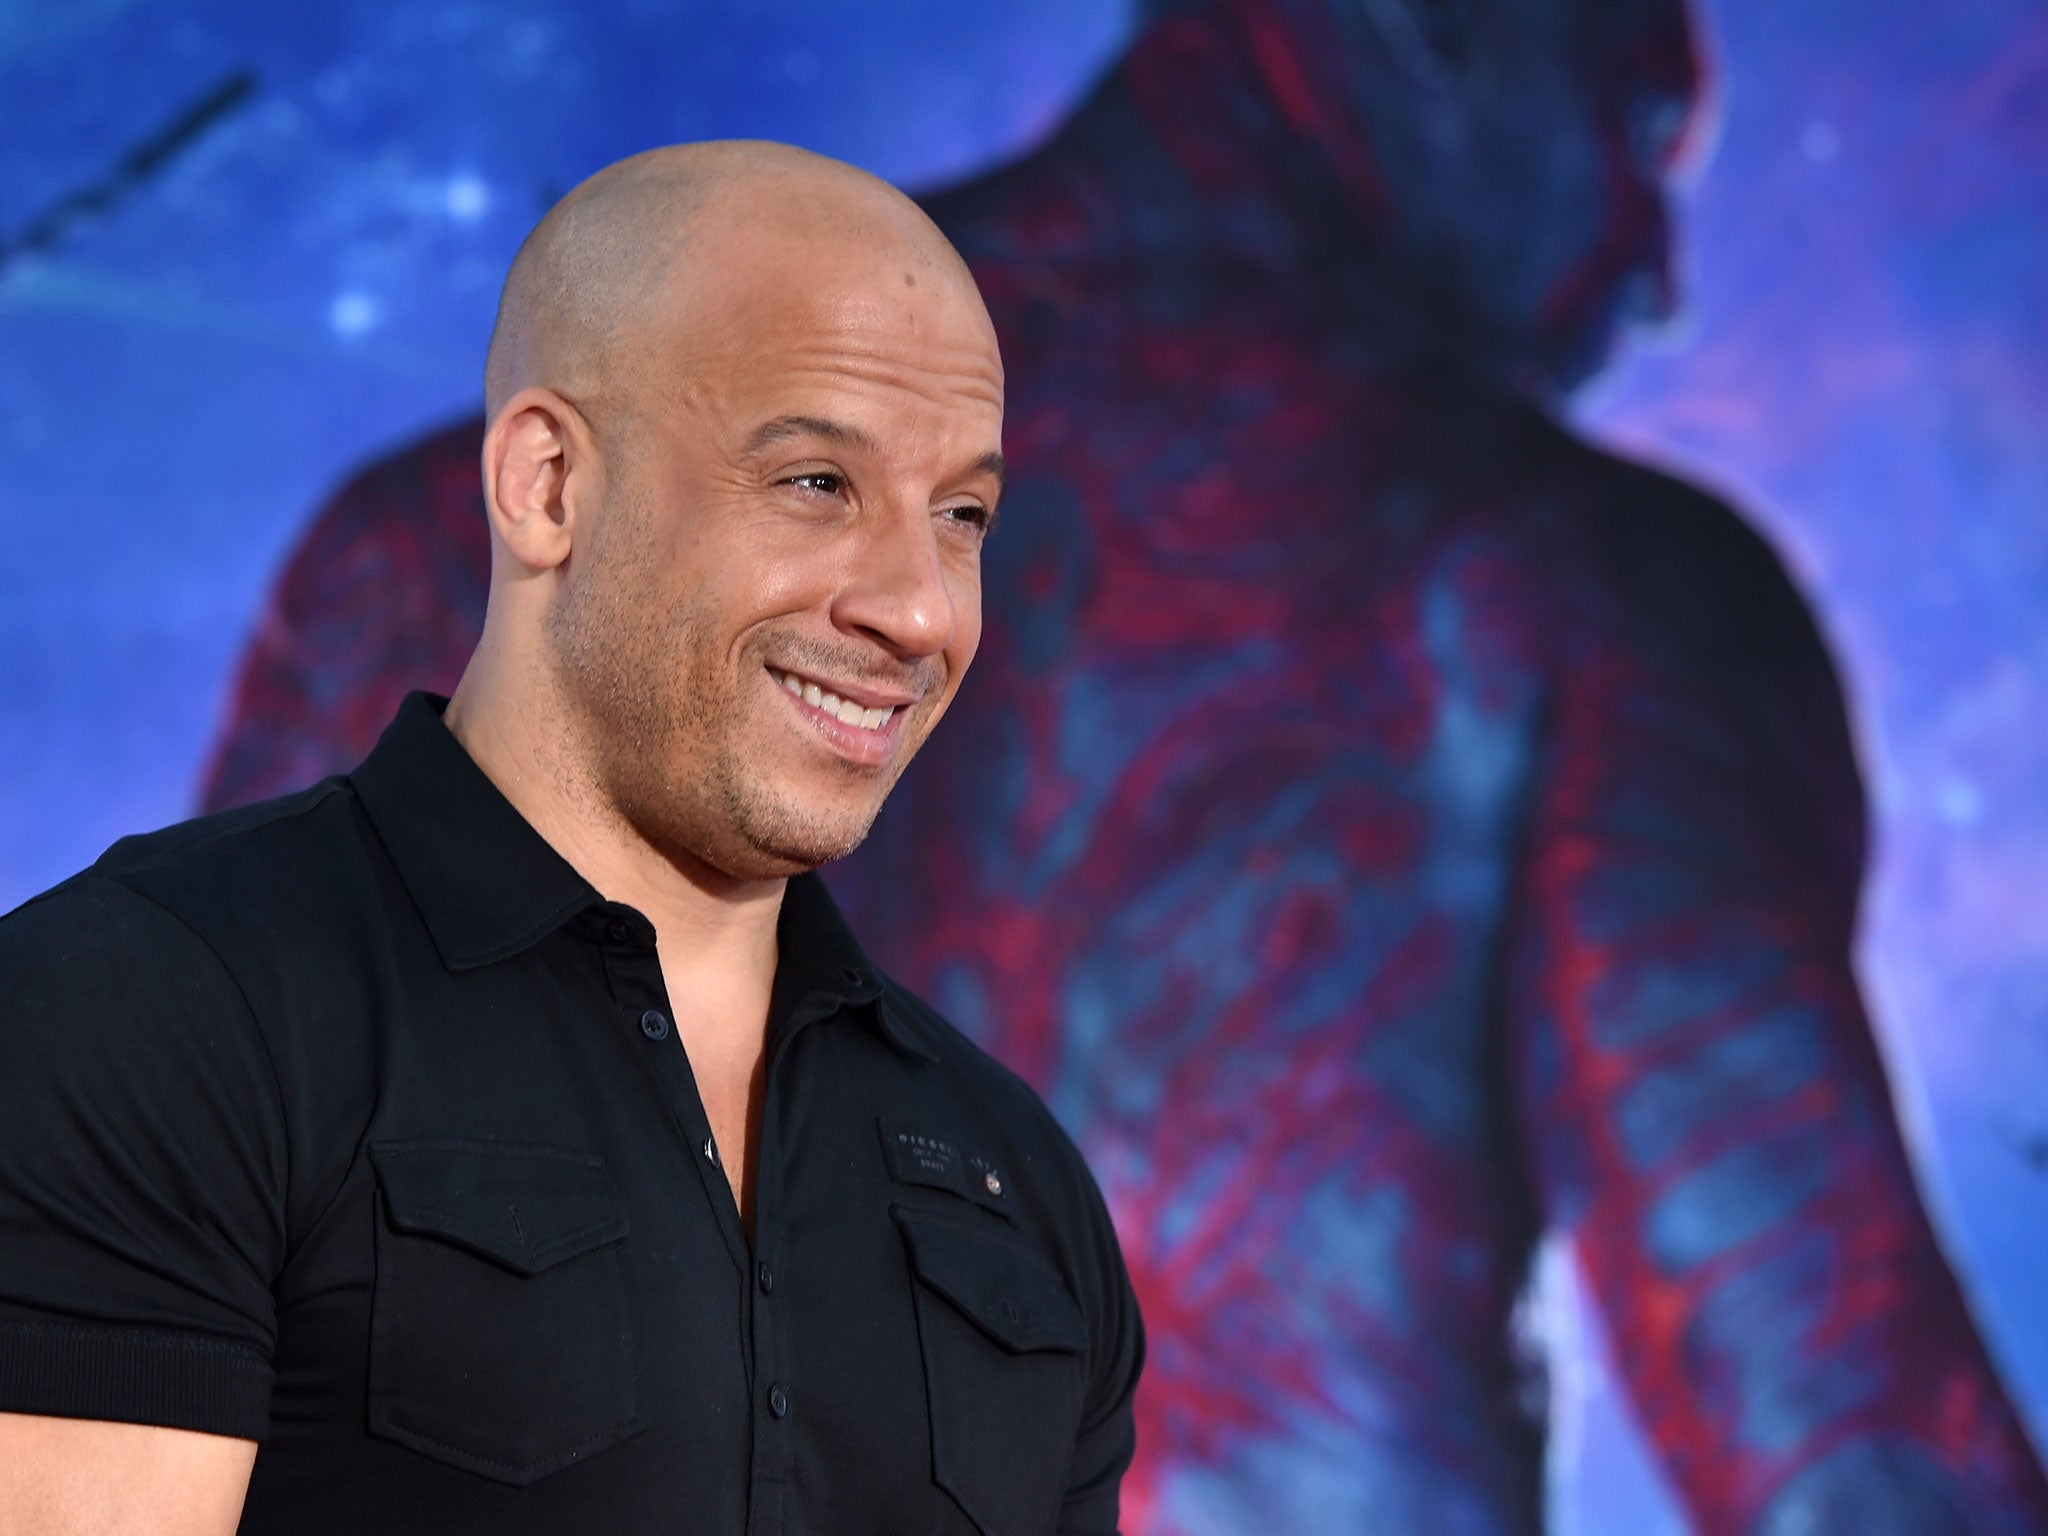 Actor Vin Diesel attends the premiere of Marvel's 'Guardians Of The Galaxy' at the Dolby Theatre on July 21, 2014 in Hollywood, California.